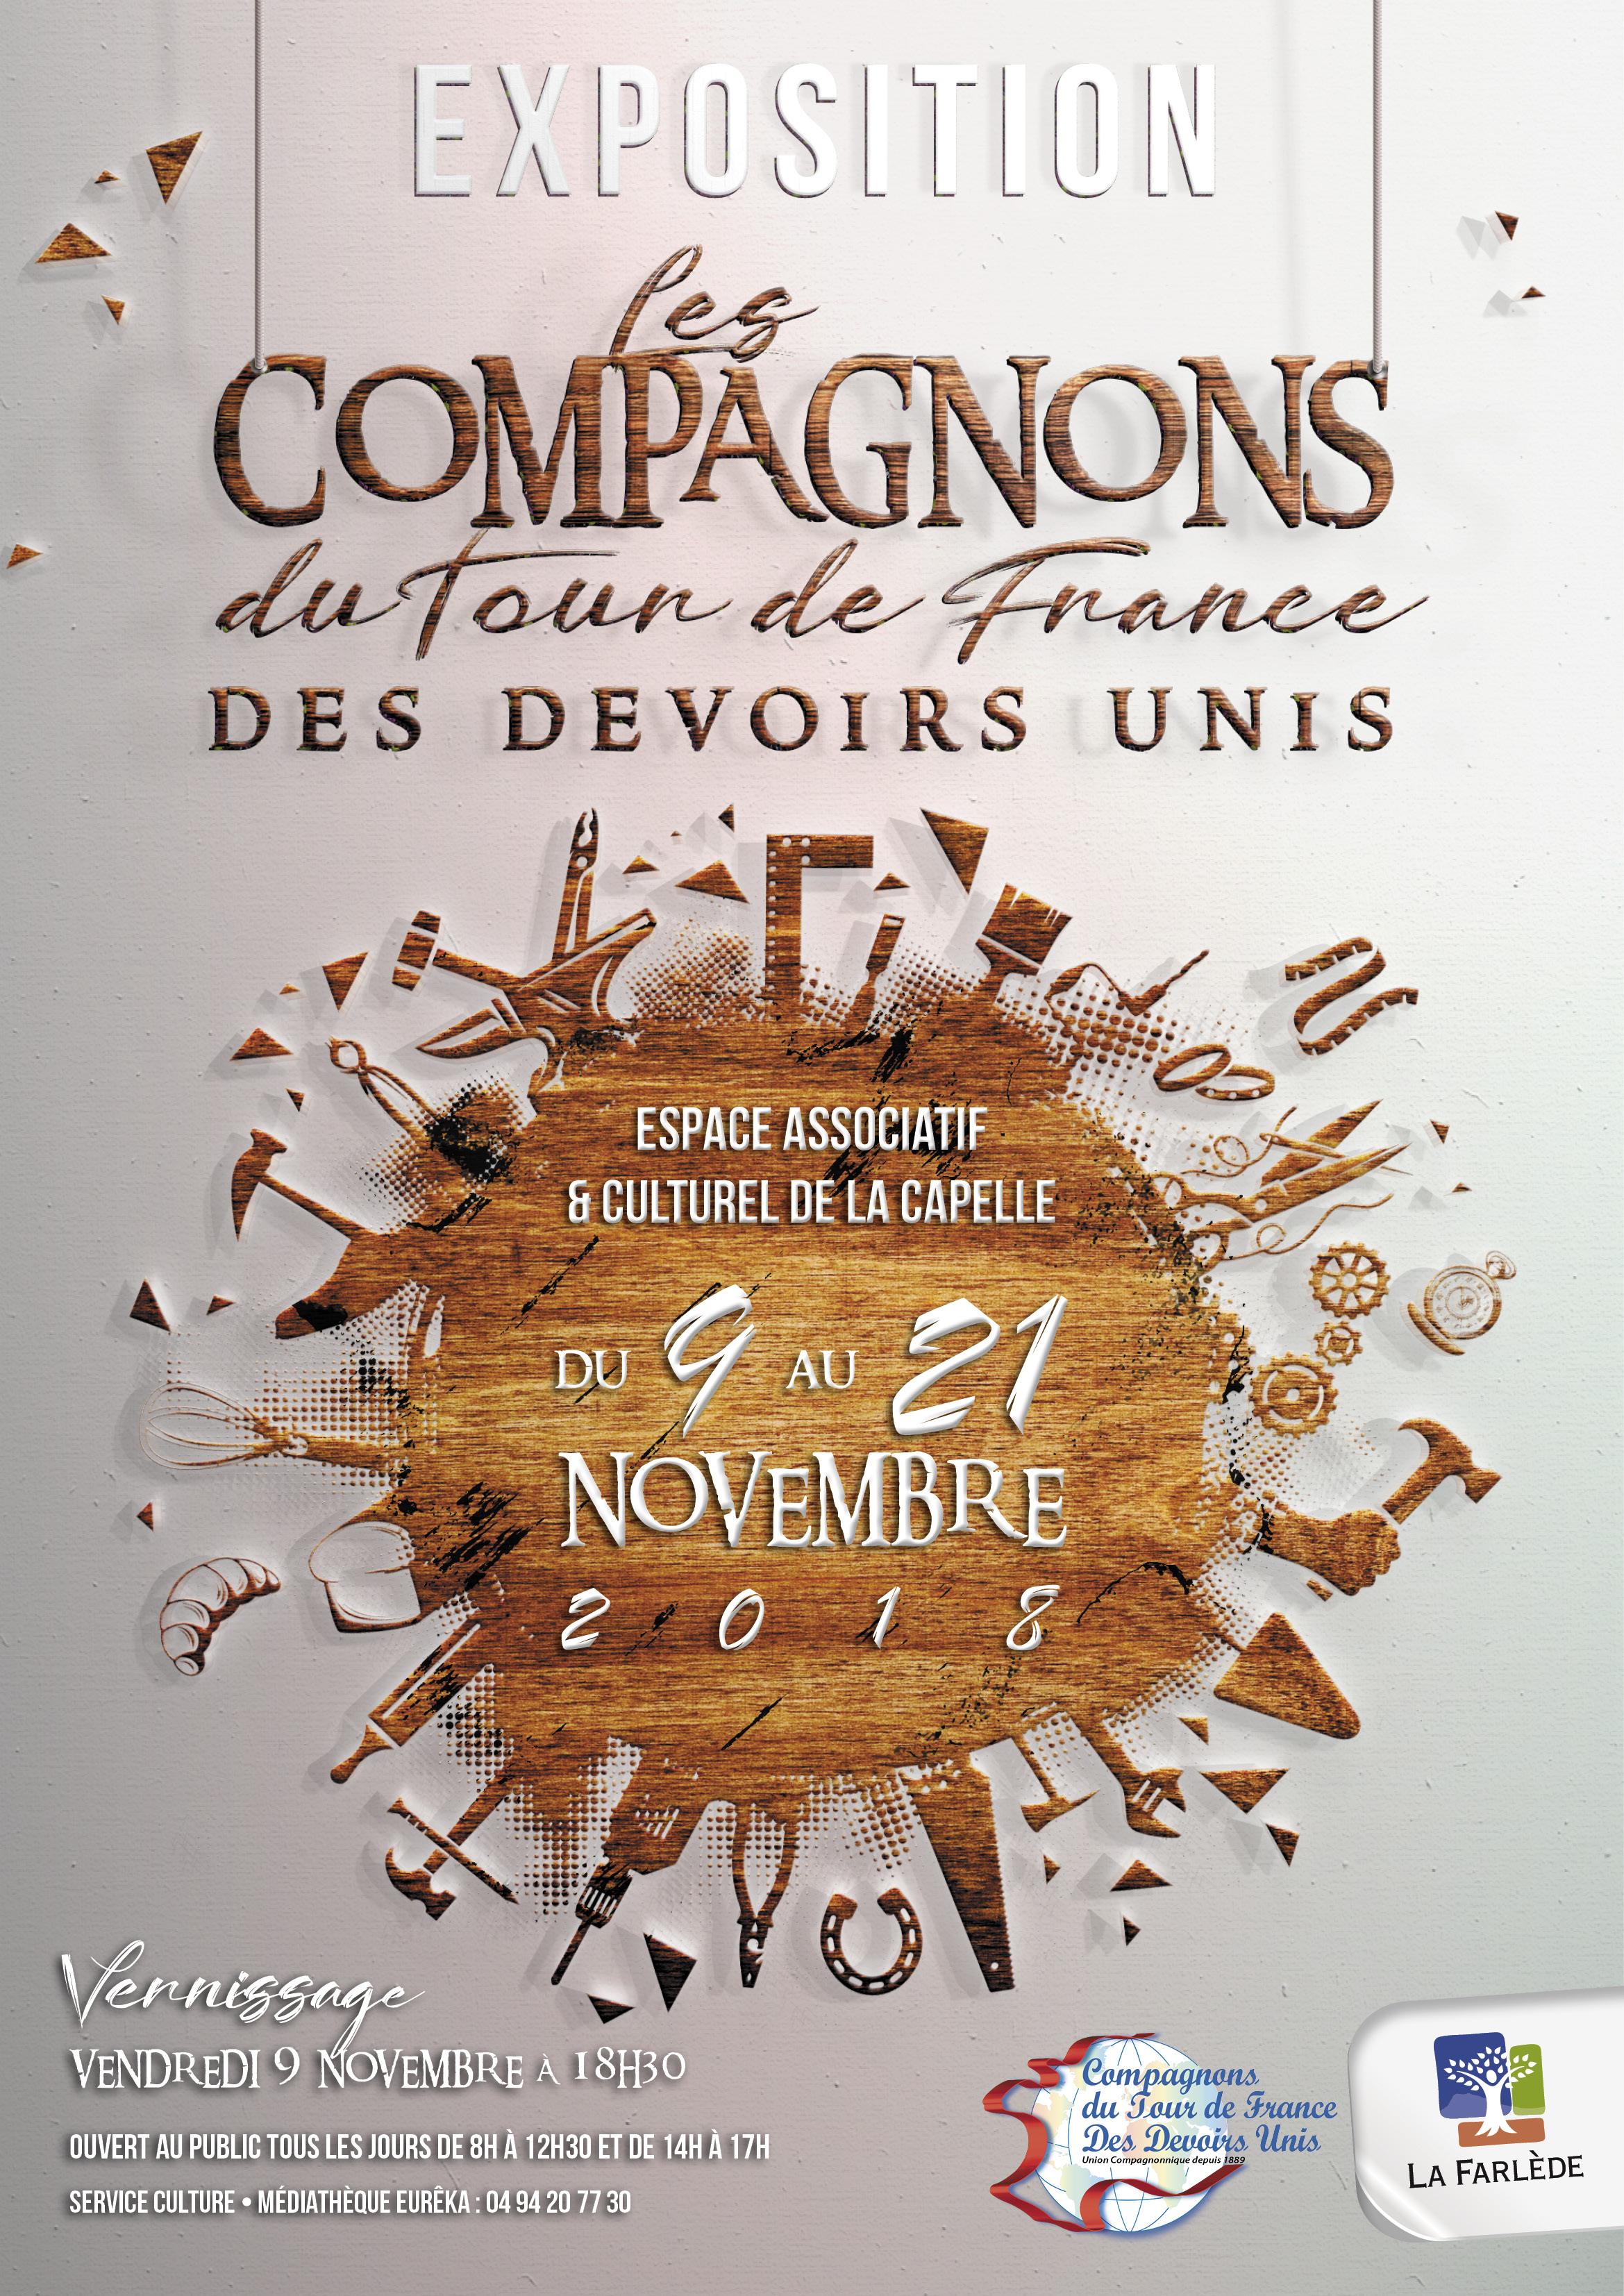 aw-affiche_web-a3-expo-compagnonsok.jpg